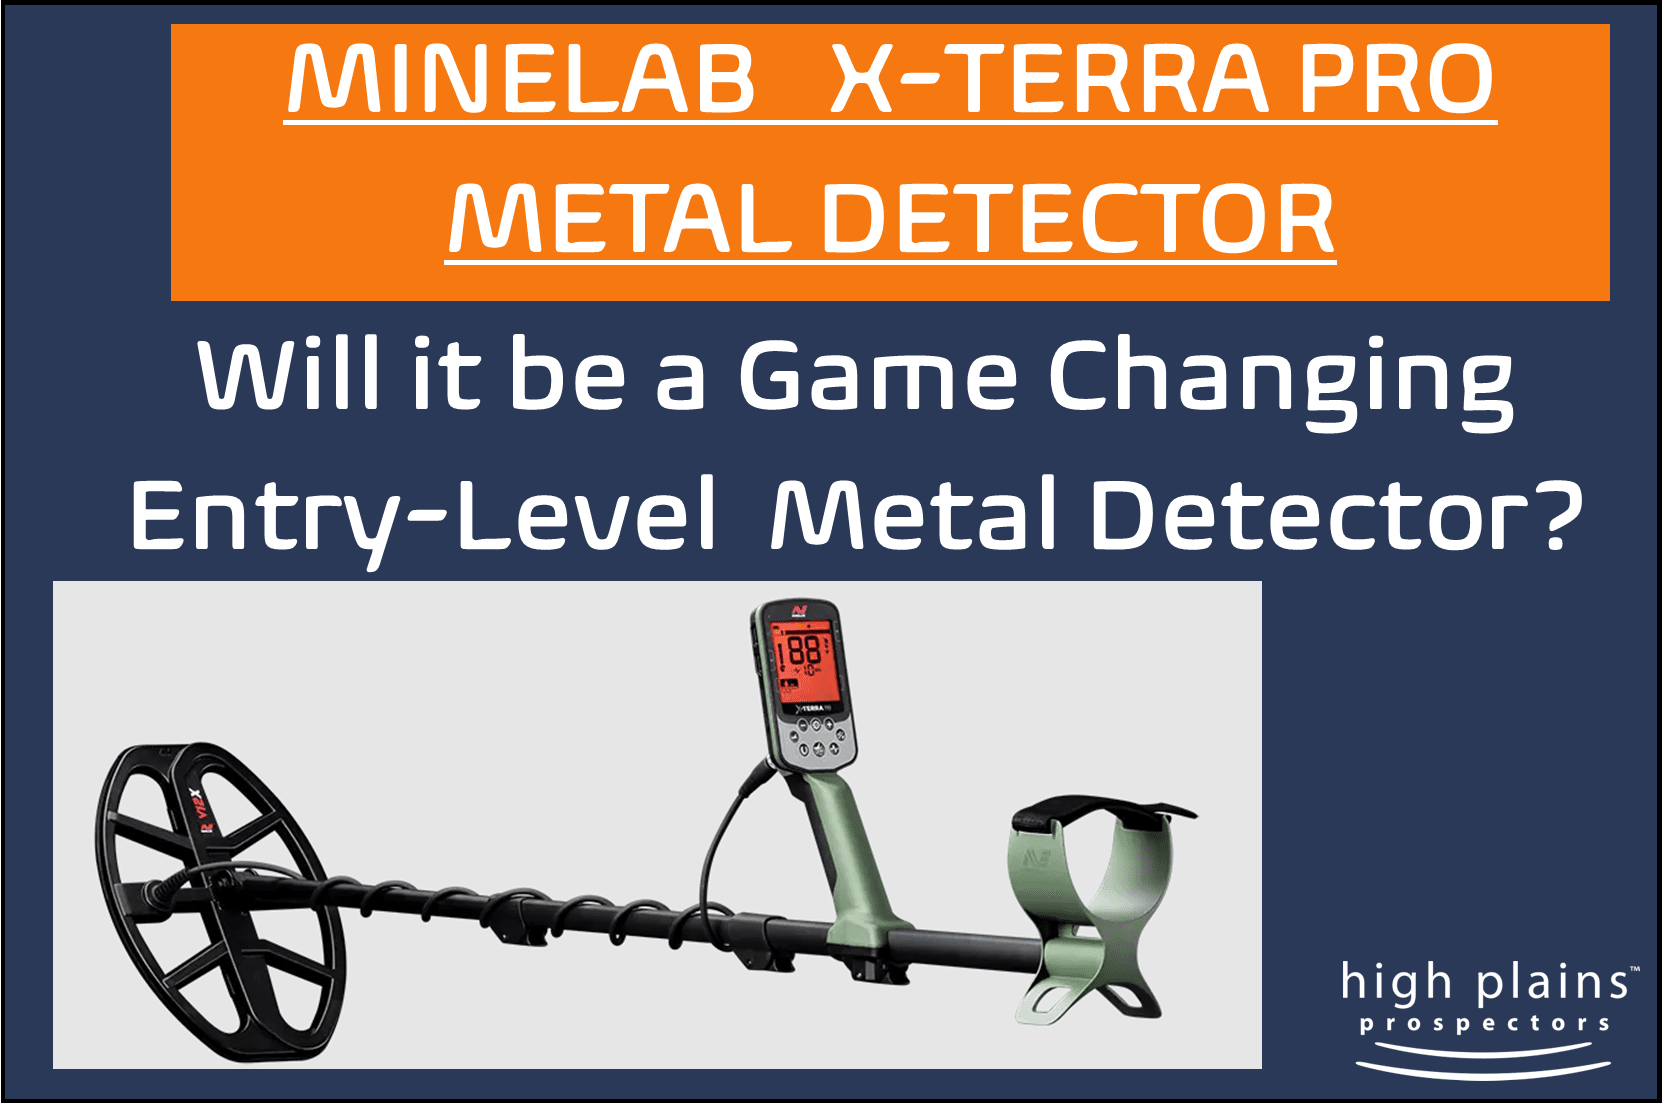 New Minelab X-Terra Pro Metal Detector - Could This Be The Game Changer in Entry Level Metal Detectors?